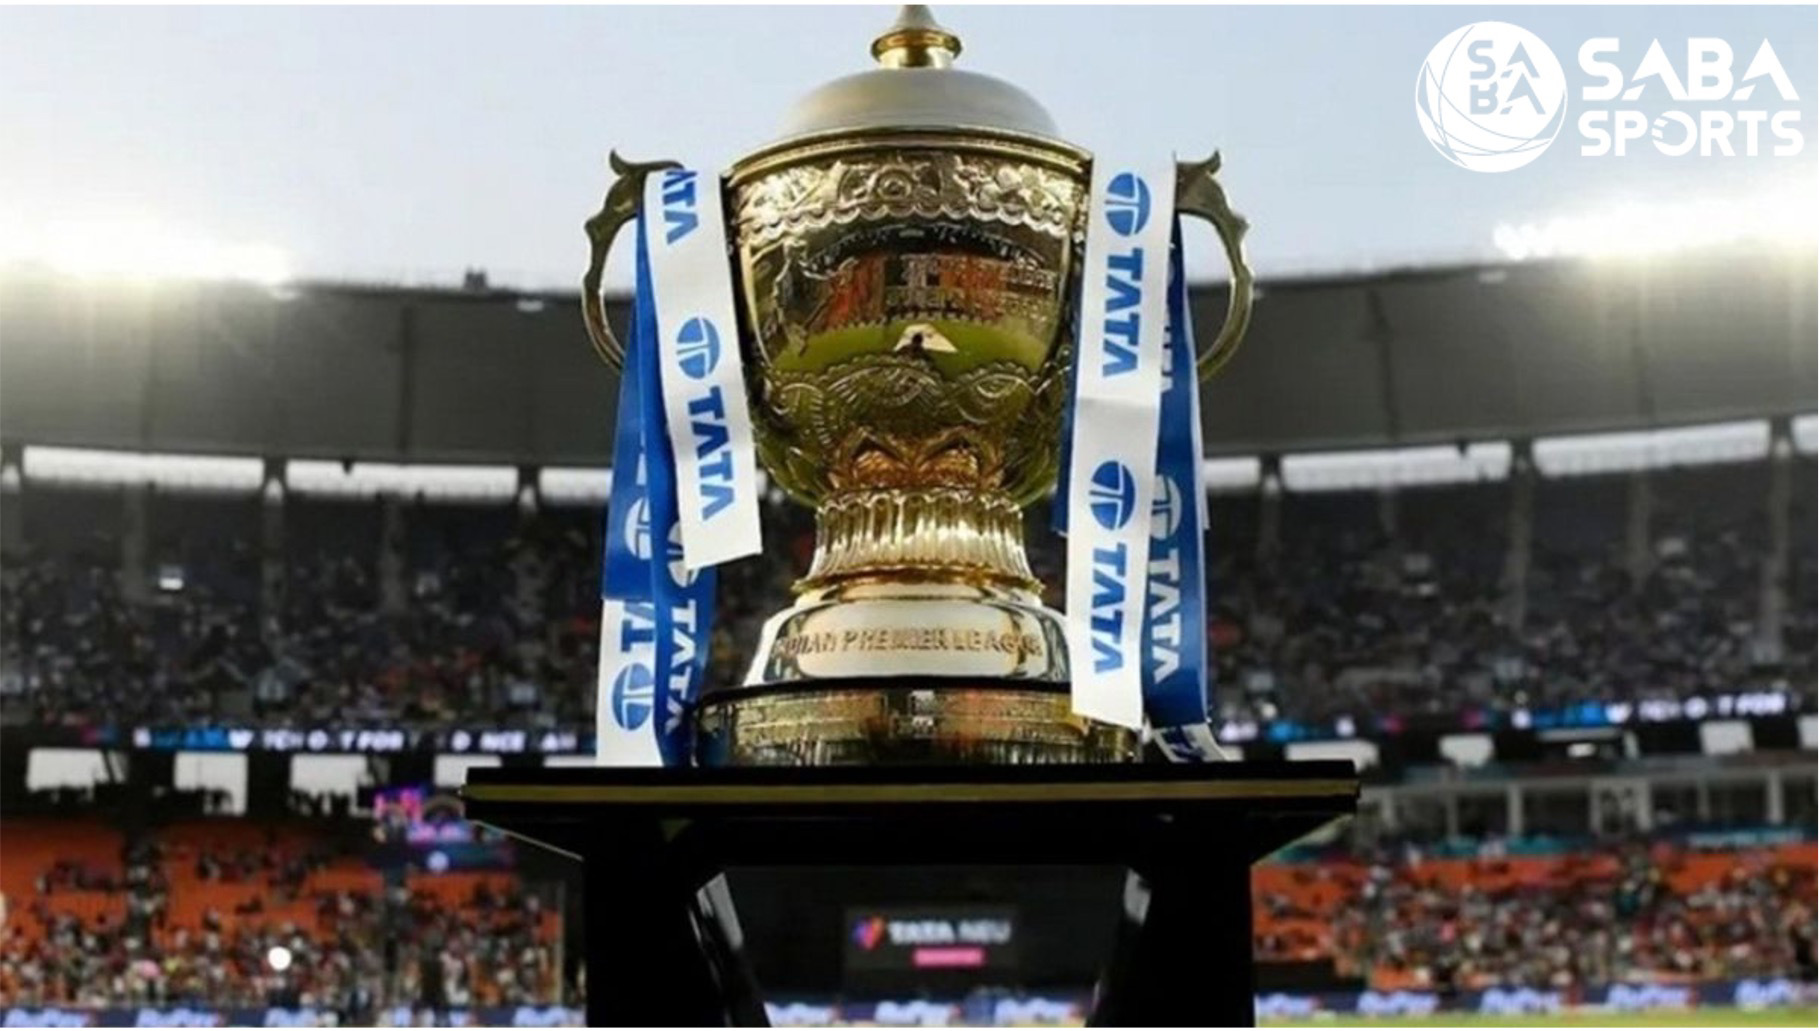 Disney Star Breaks Record with IPL 2023 Live Broadcast Highest-Ever Viewership of 36.9 Crore